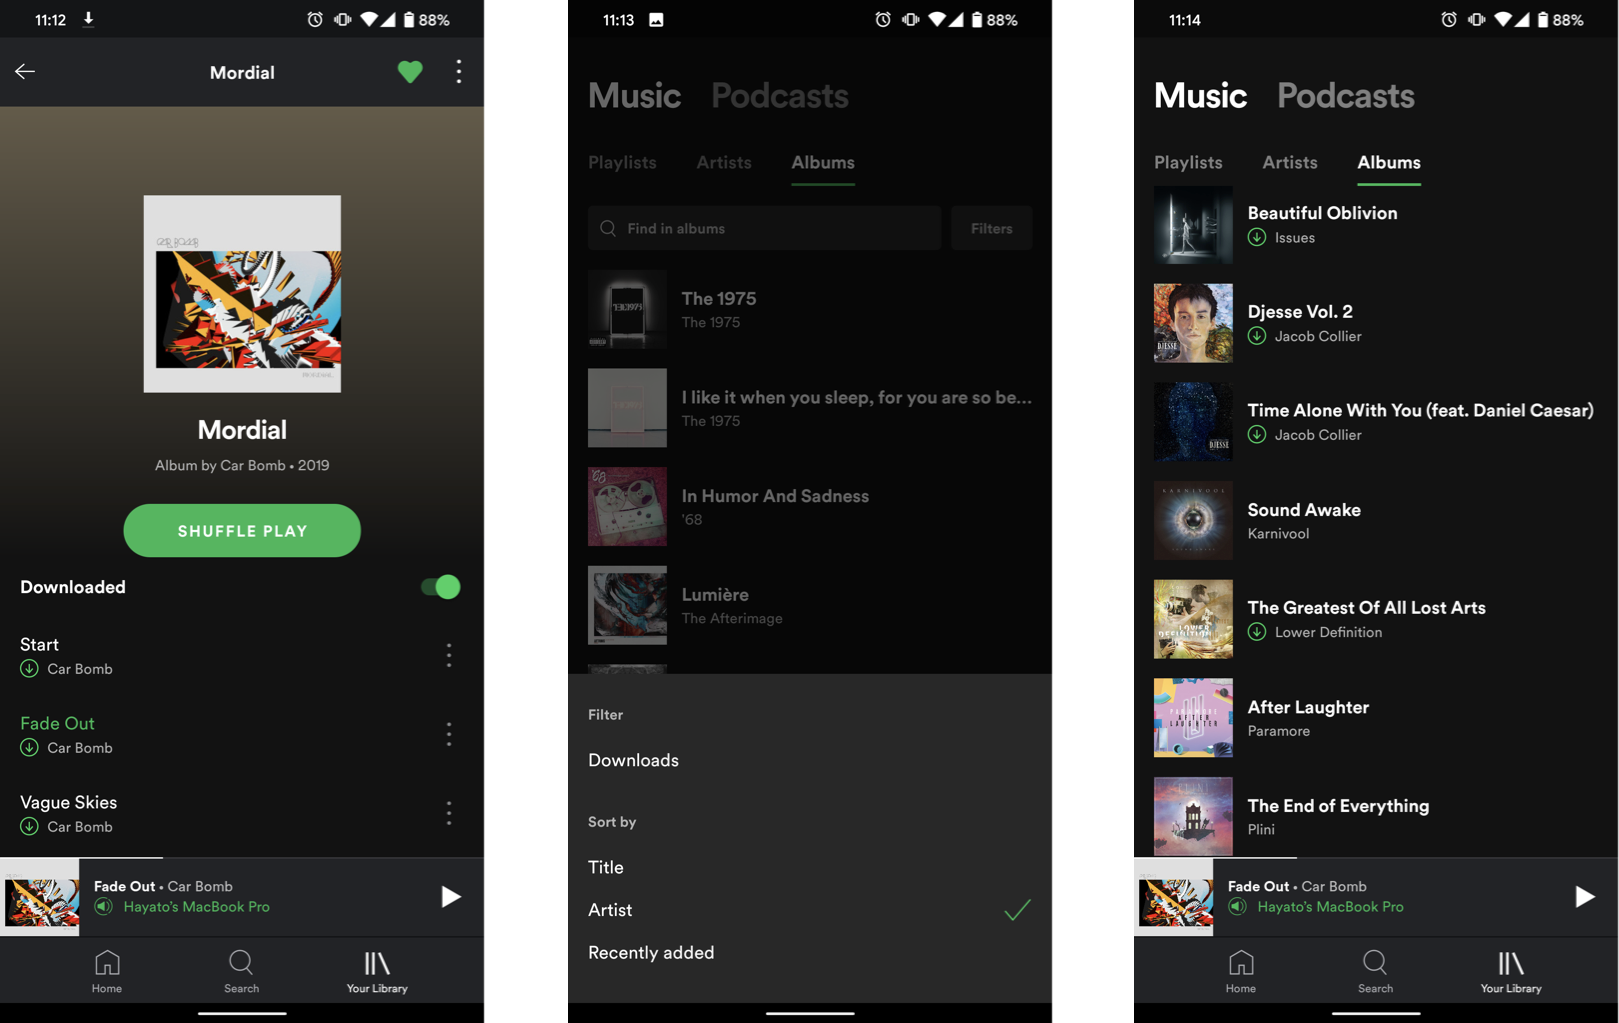 Downloading music for offline playback in Spotify